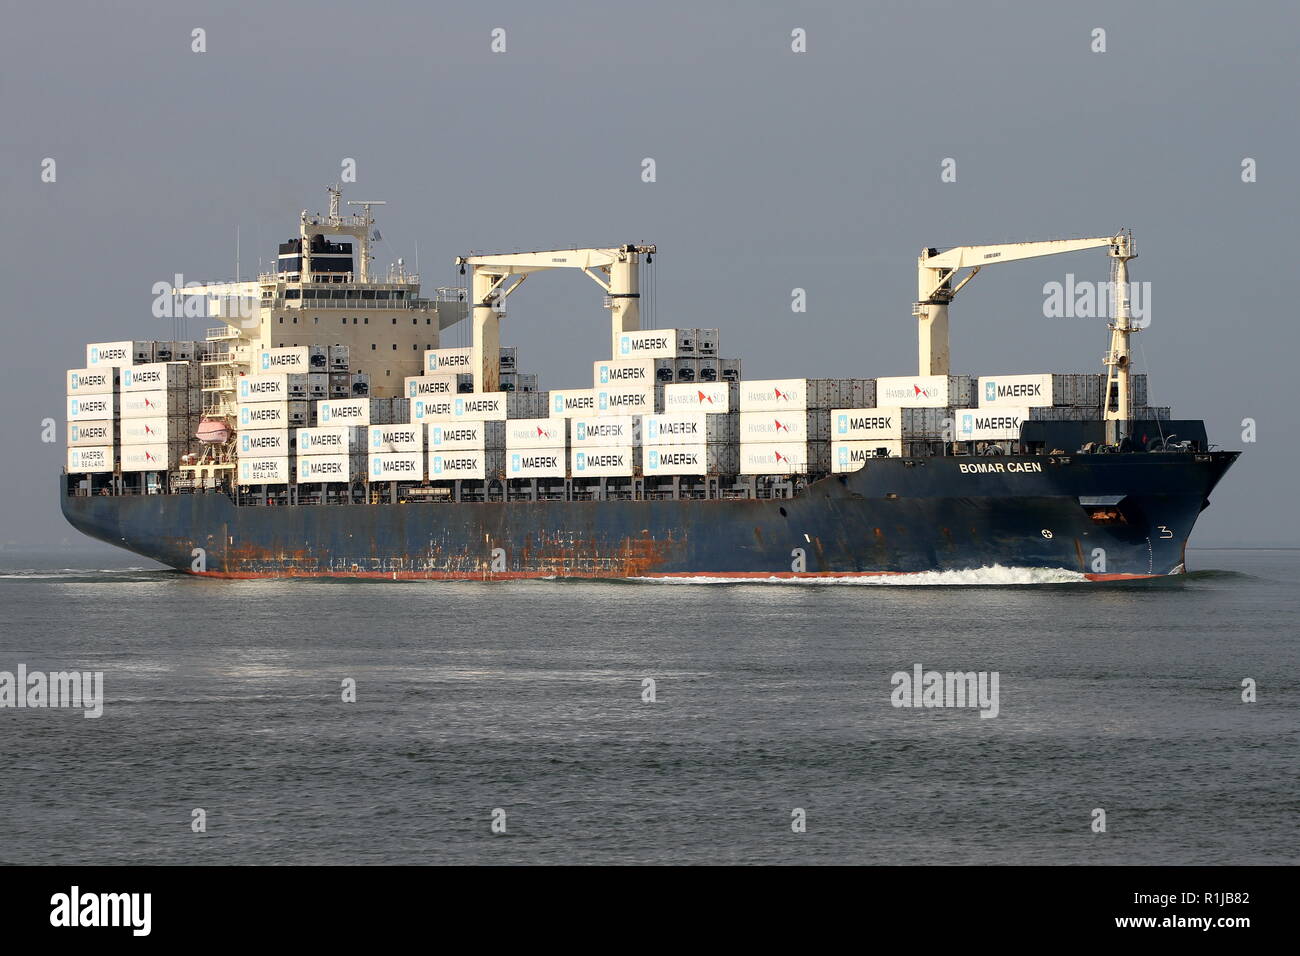 The container ship Bomar Caen passes on 19 October 2018 Terneuzen and continues to the port of Antwerp. Stock Photo